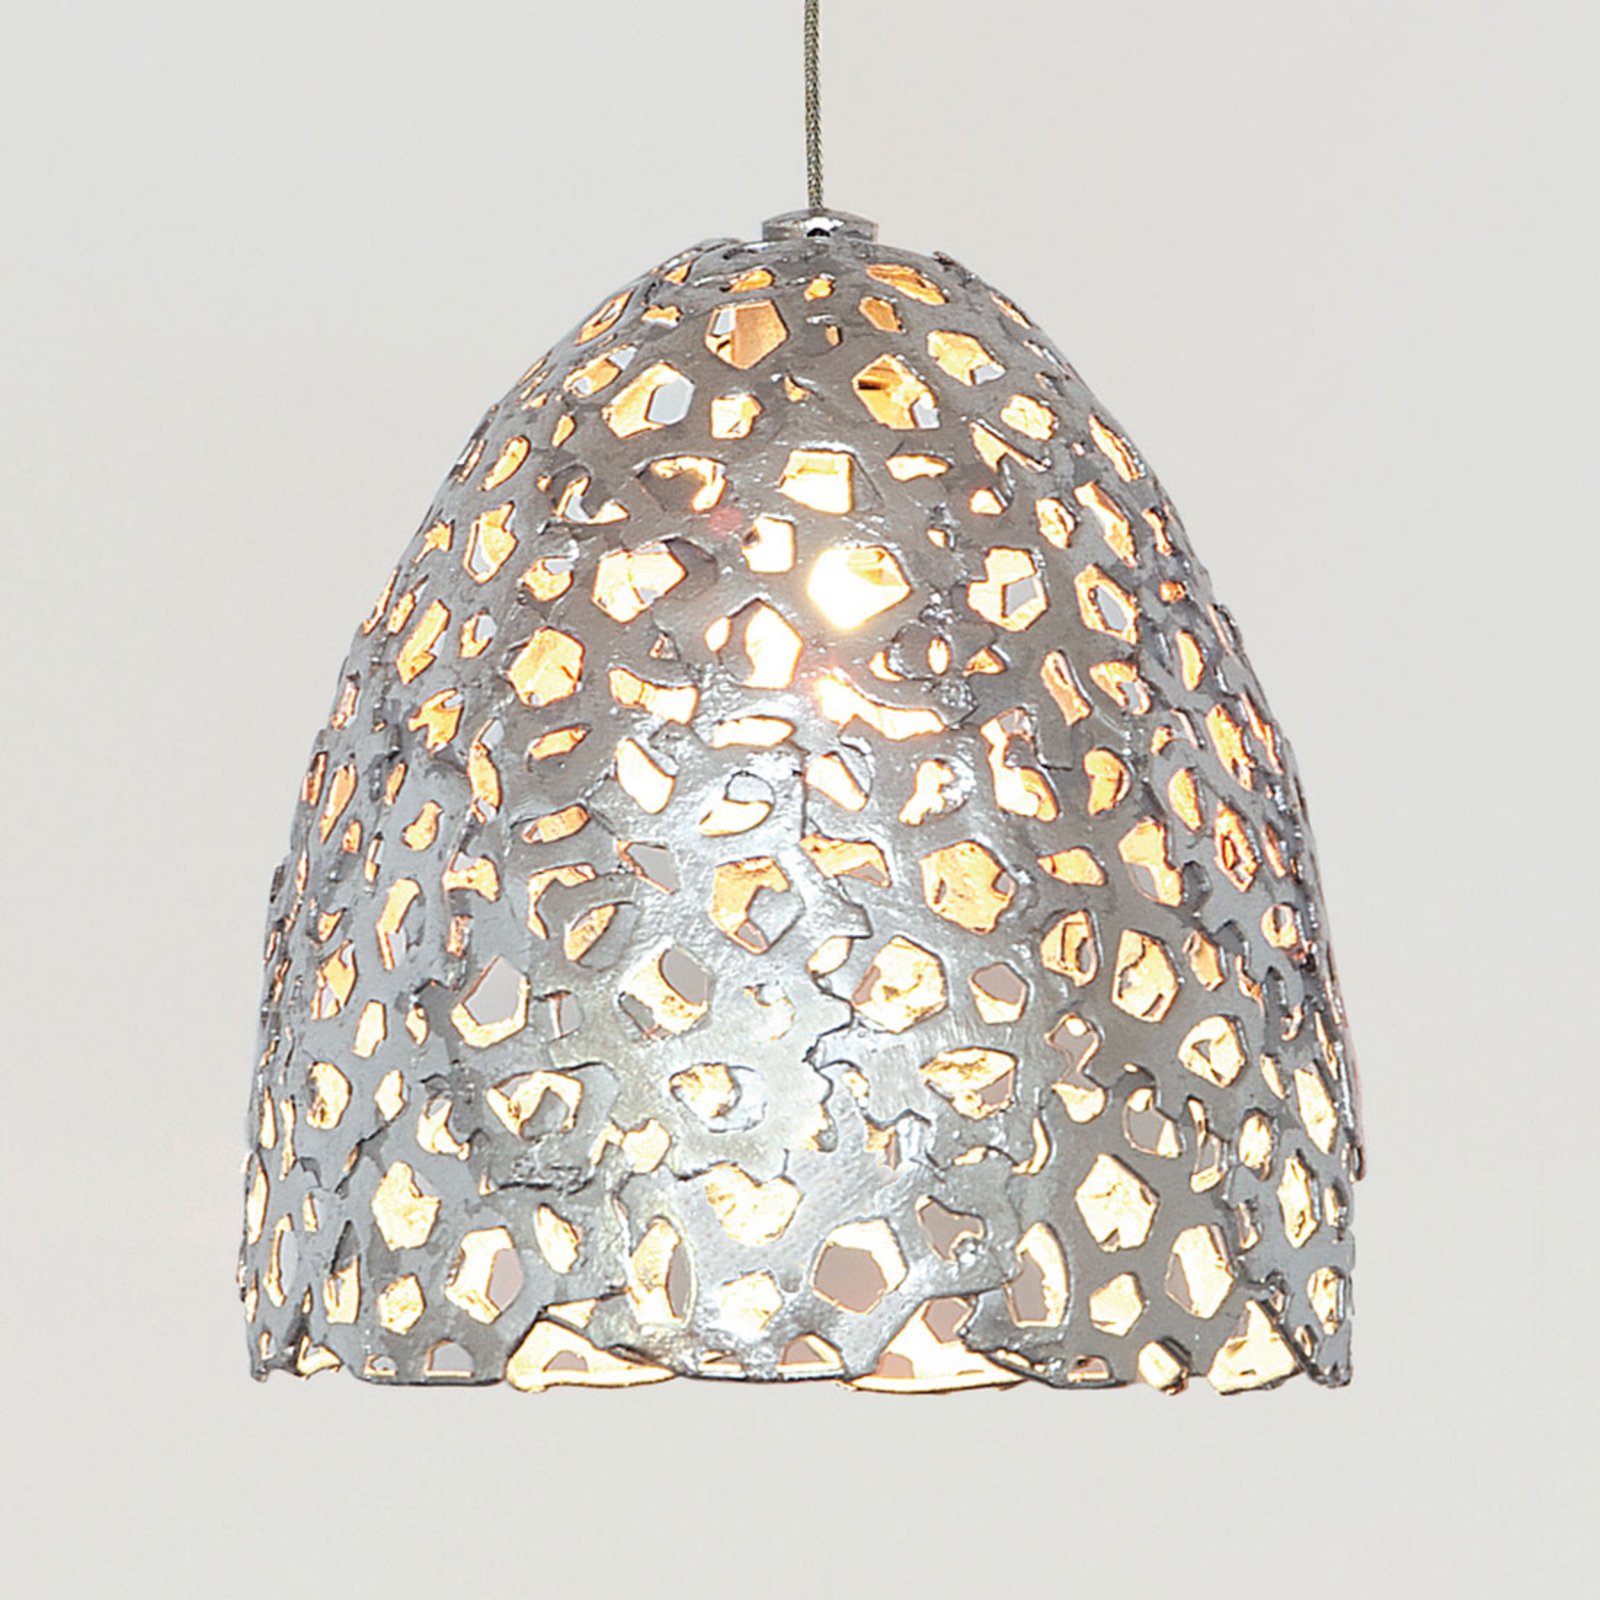 Hanglamp Lily Piccolo, zilver